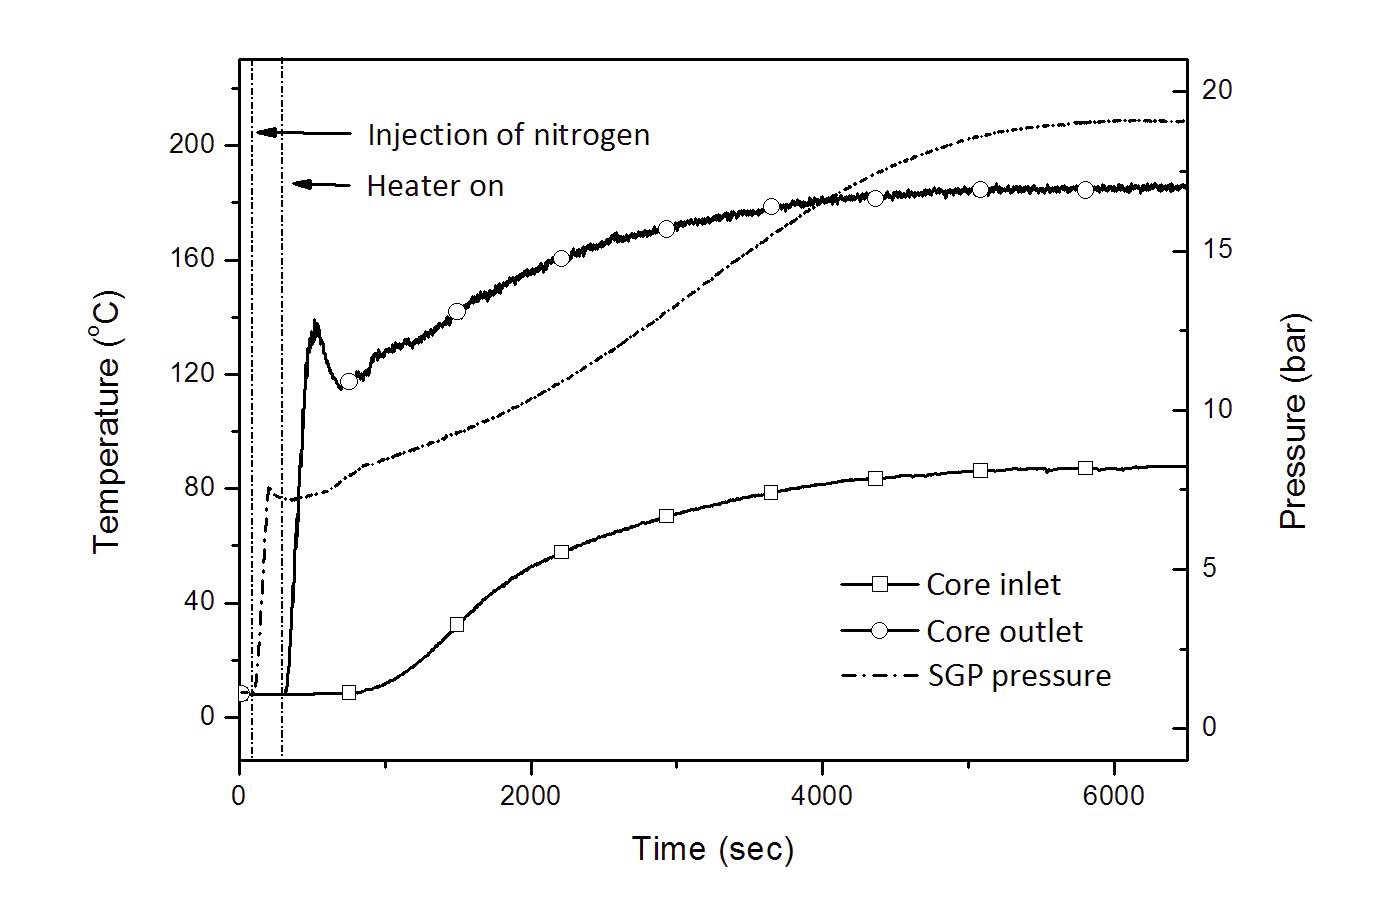 RTF Approach to Steady-state Condition Prior to Initiating Transients